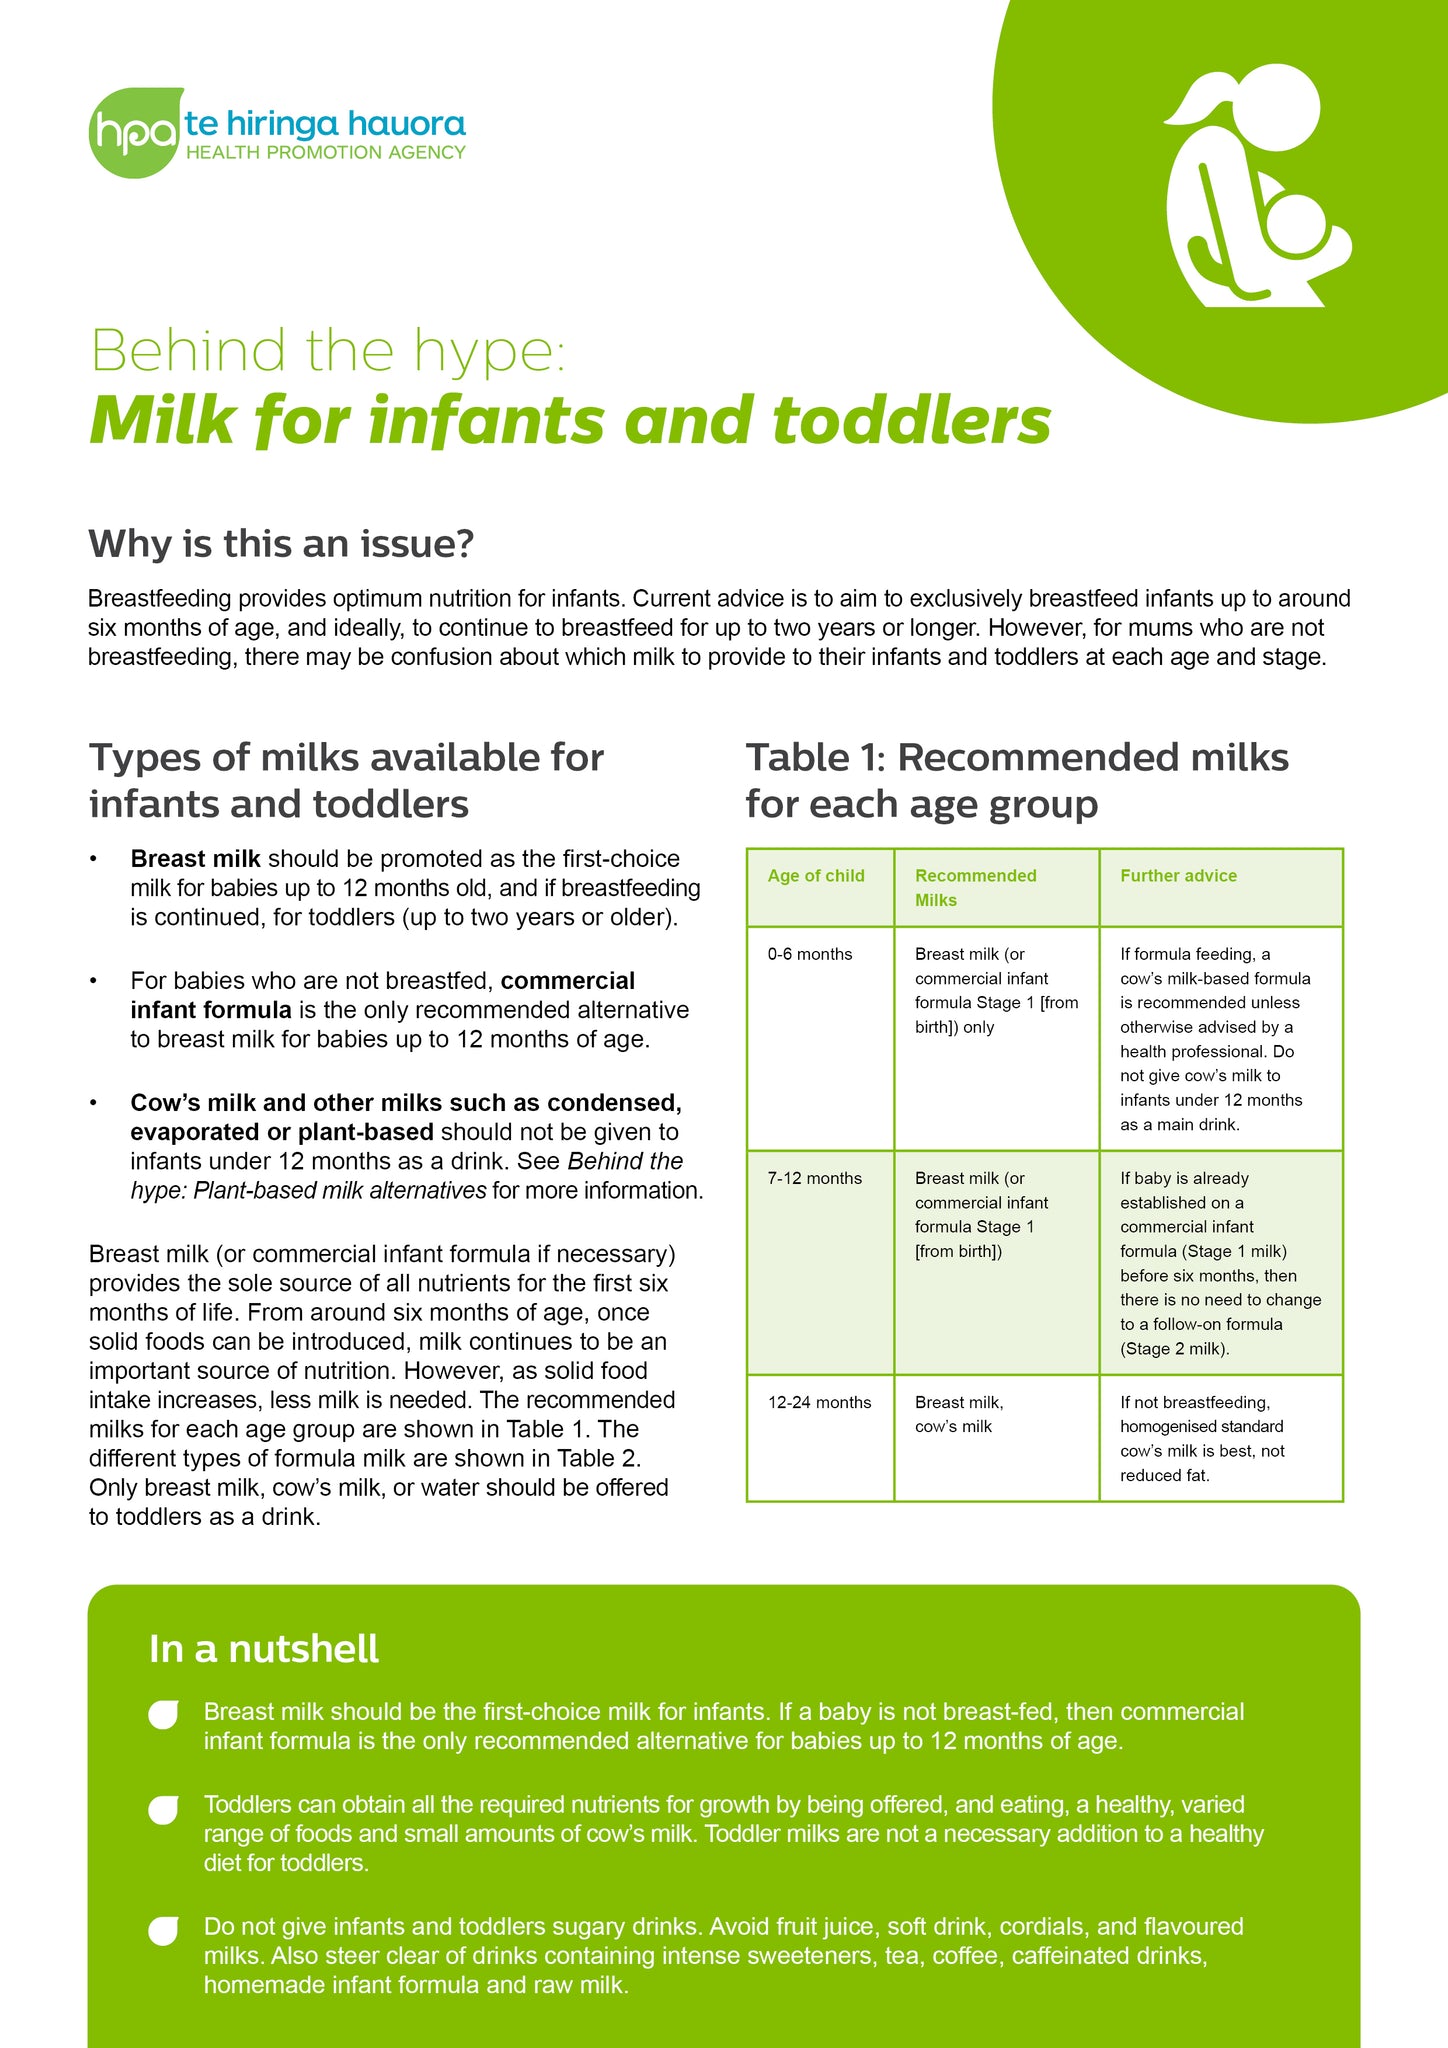 Behind the hype: Milk for infants and toddlers - Digital only